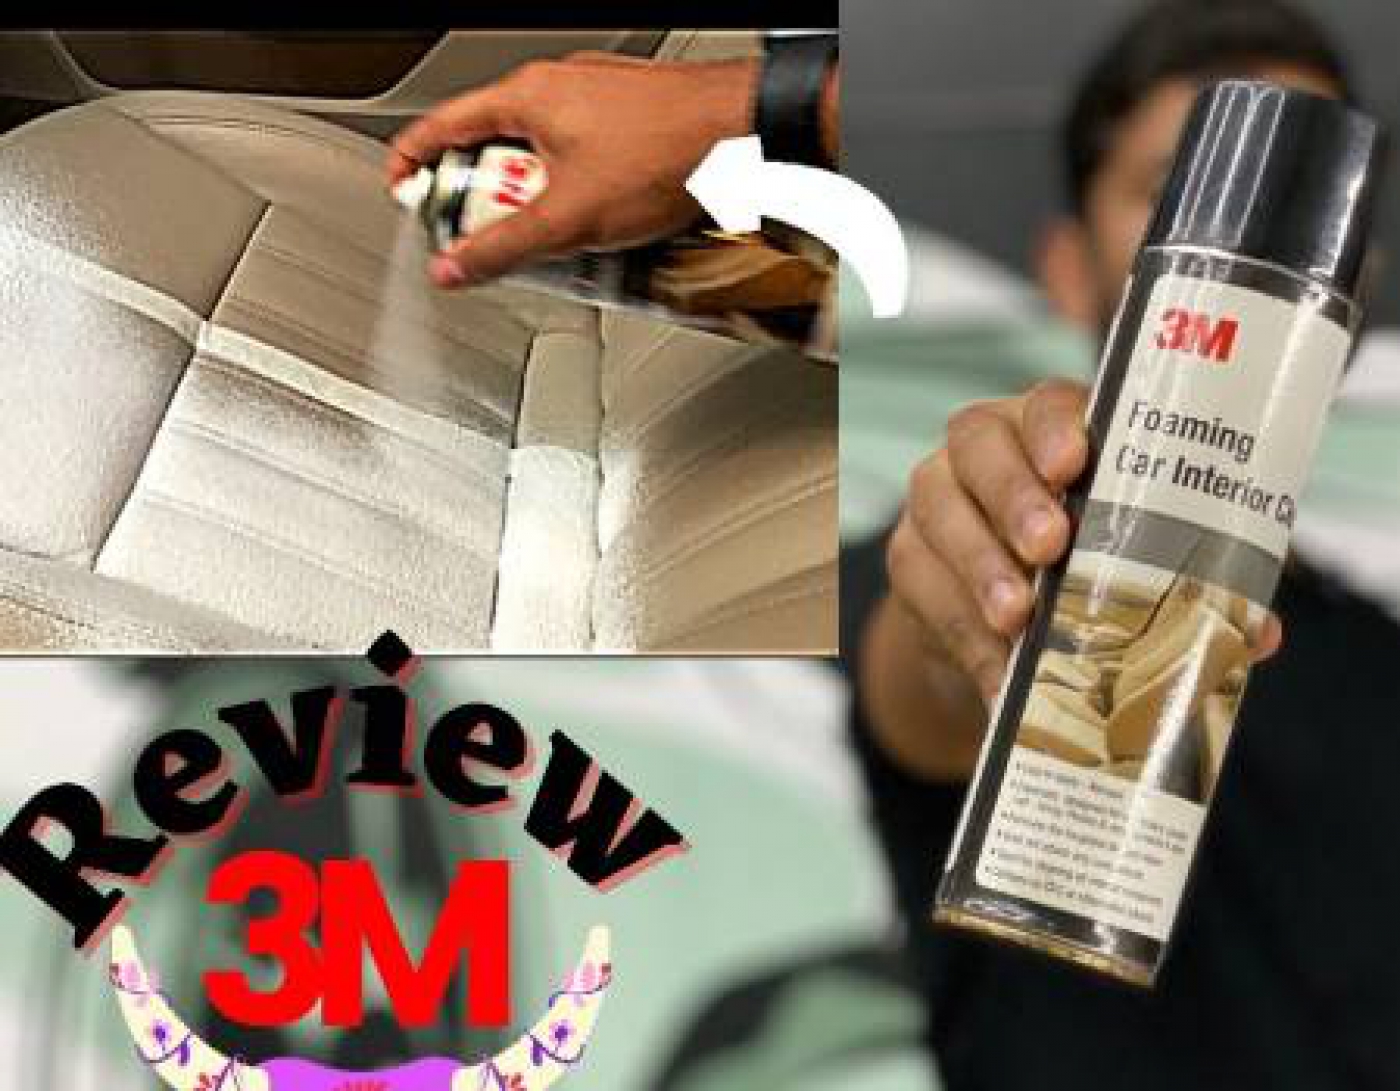 3m Car Care Germkleen Products in Vizag